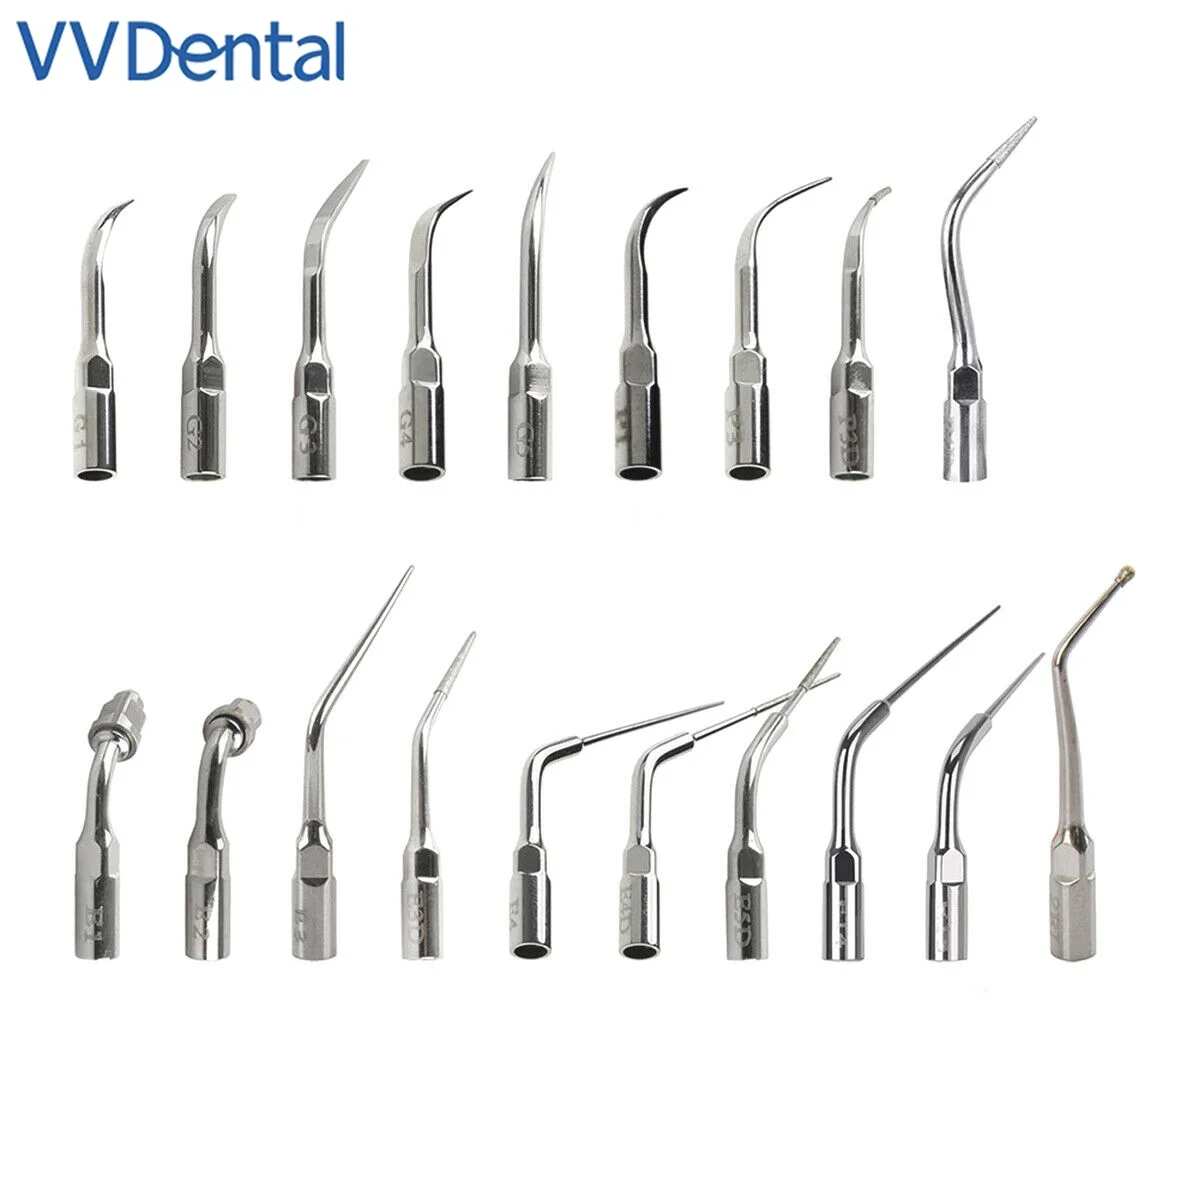 

Factory Price Dental Ultrasonic Scaler Tips Scaling Periodontics Endodontics Fit Woodpecker/EMS UDS Limited Time G1/G2/G3/G4